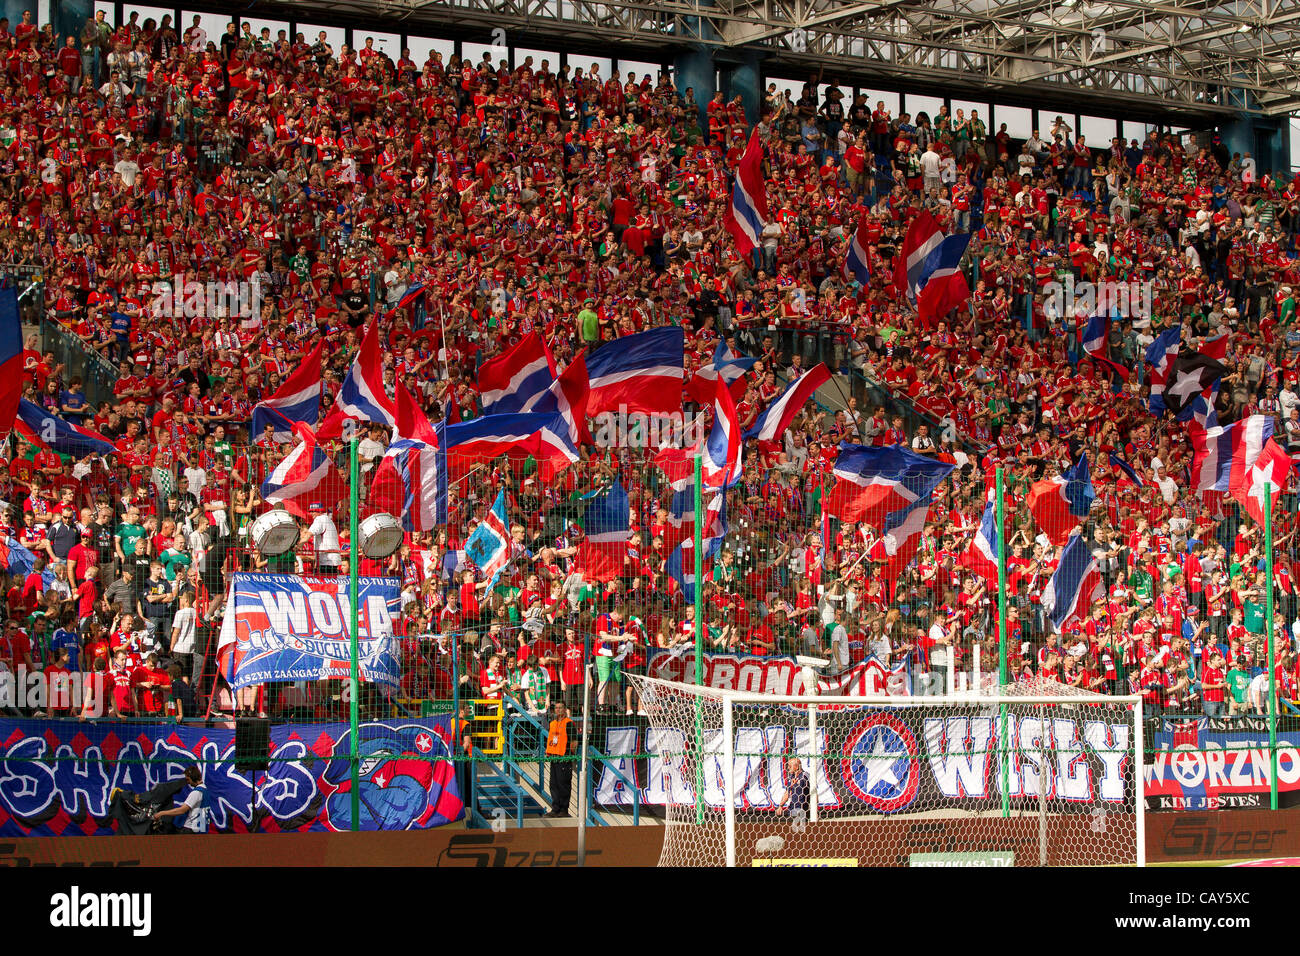 06.05.2012. Krakow, Poland.  T-Mobile Ekstraklasa League Wisla Krakow versus WKS Slask Wroclaw. WKS won the game by a score of 1-0 and held on to win the Polish league for the first time for 34 years. Stock Photo